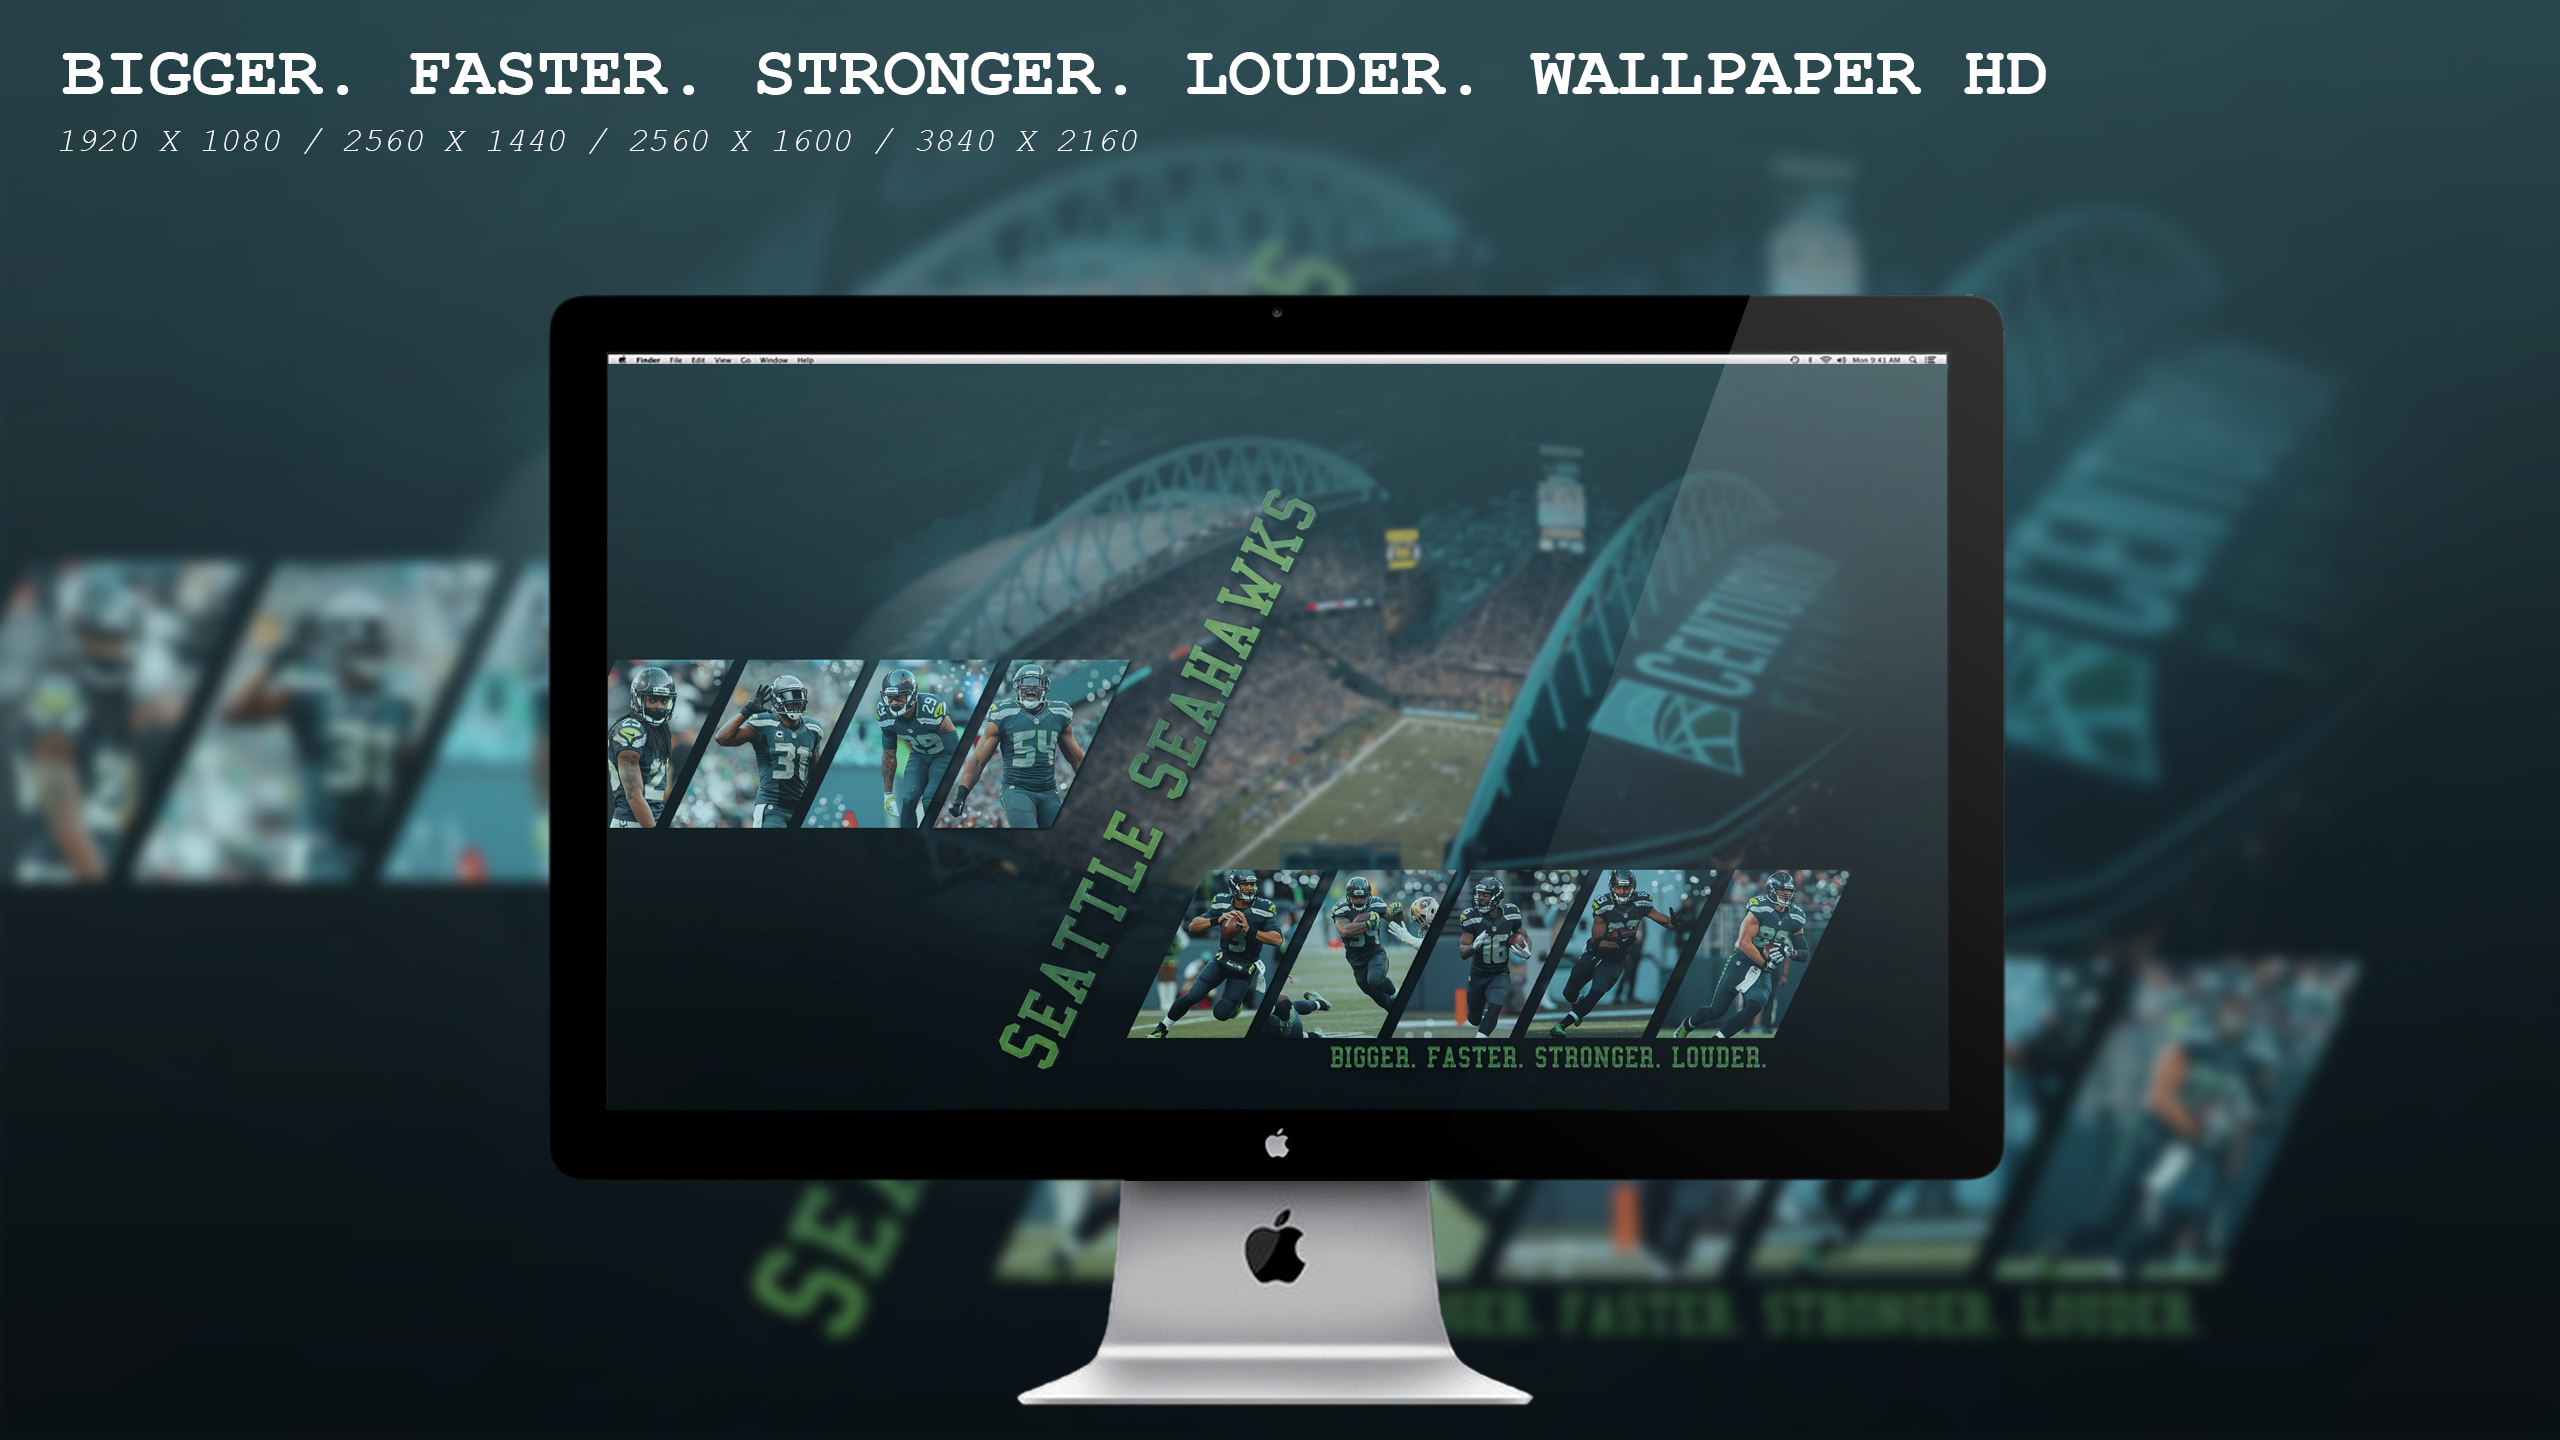 Bigger Faster Stronger Louder Wallpaper HD By Beaware8 On